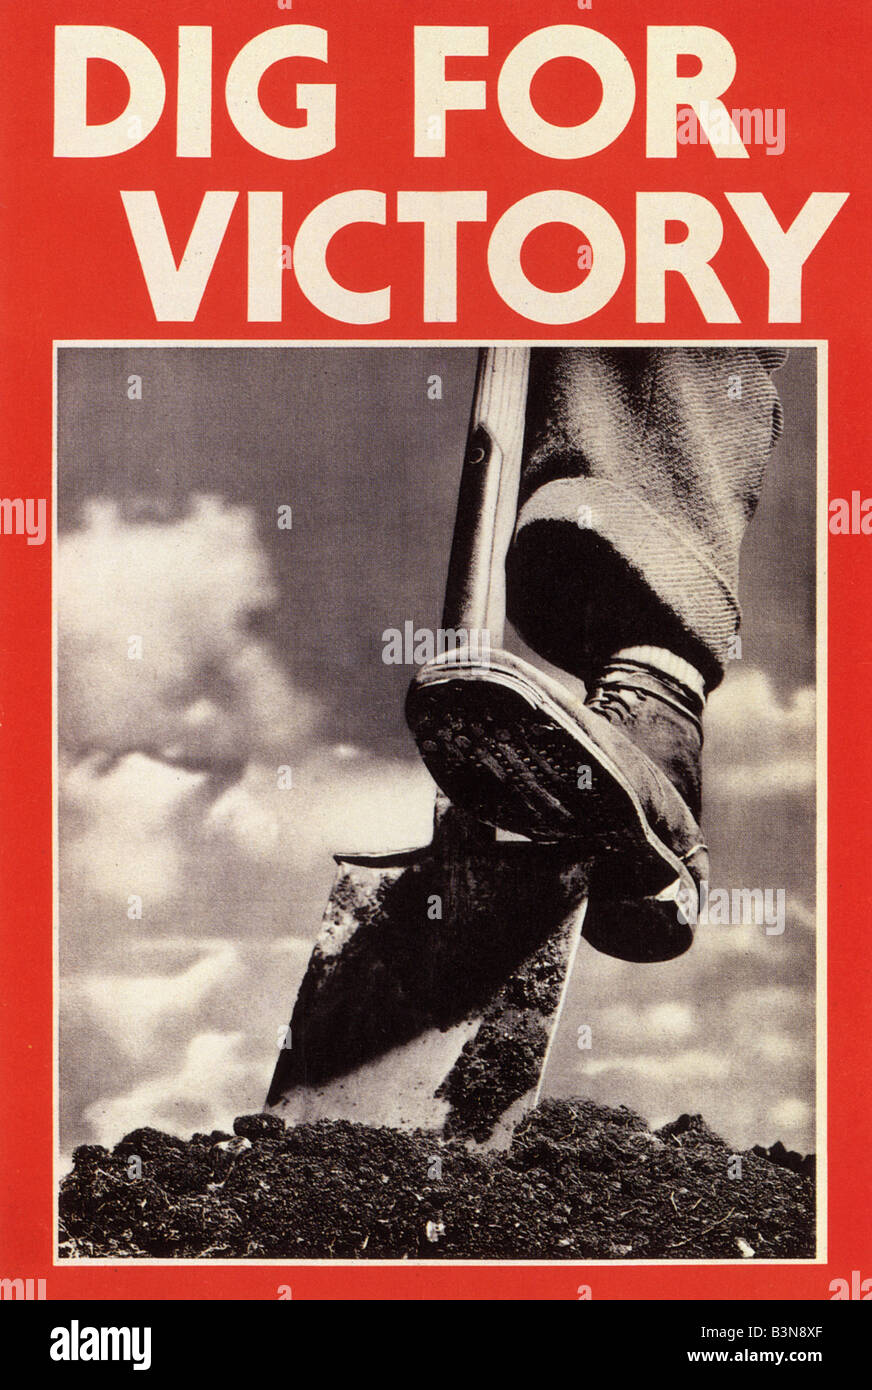 DIG FOR VICTORY  WW2 UK poster Stock Photo